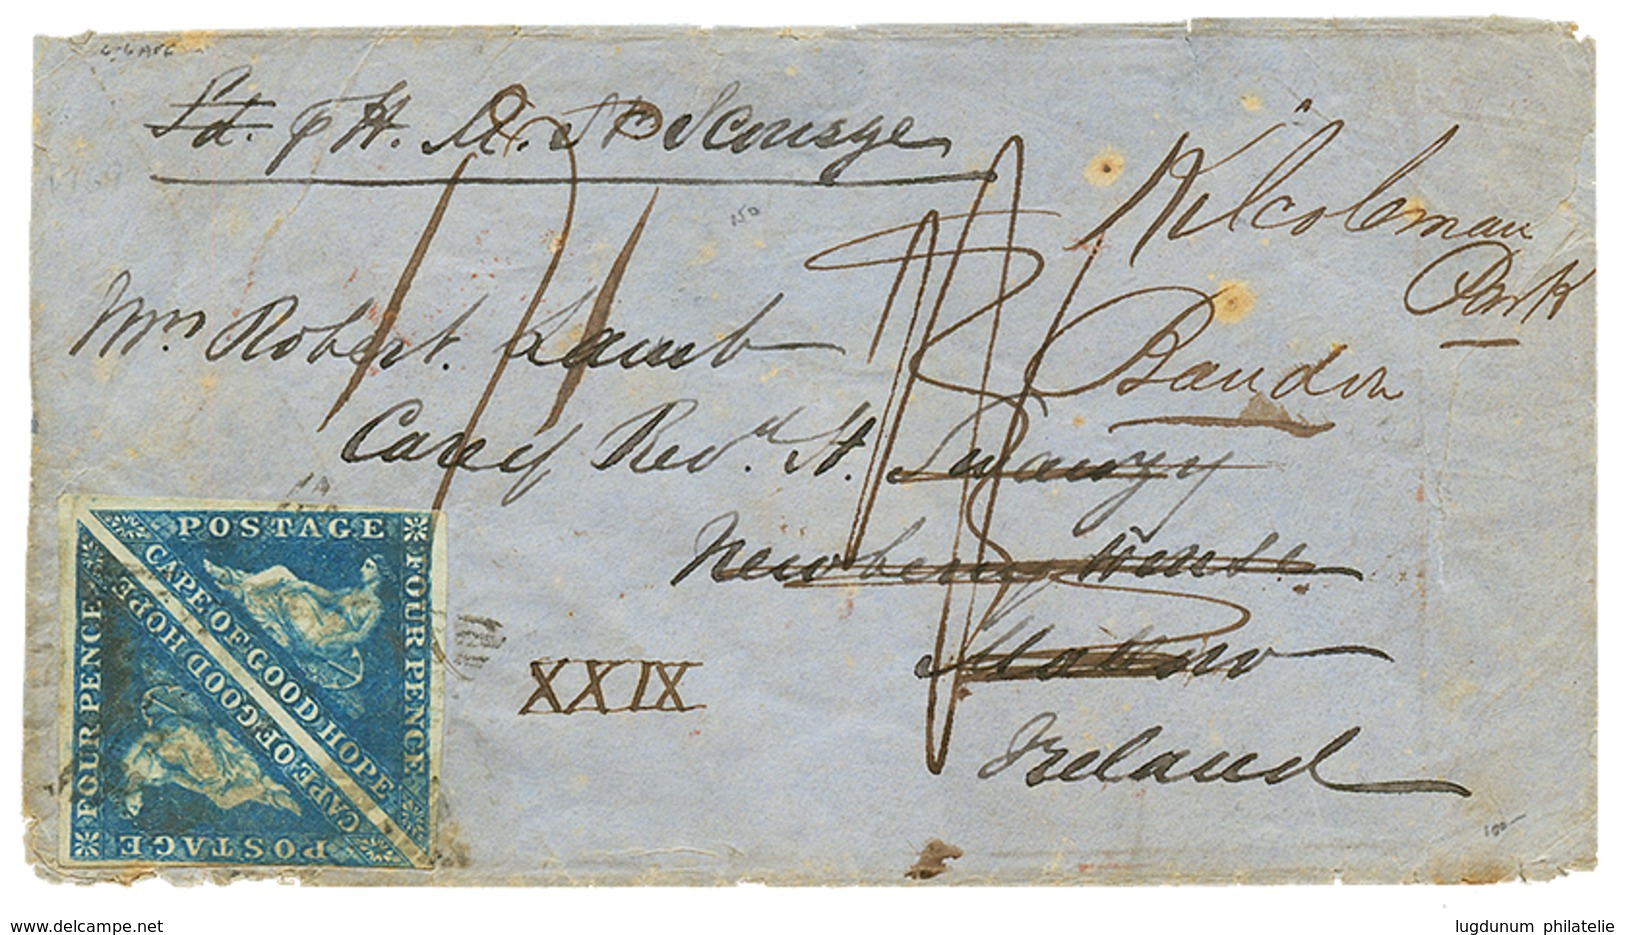 CAPE OF GOOD HOPE To IRELAND : 1857 Pair 4d (small Margin At Base But Stamp Not Touched) + Tax Marking On Envelope To MA - Cabo De Buena Esperanza (1853-1904)